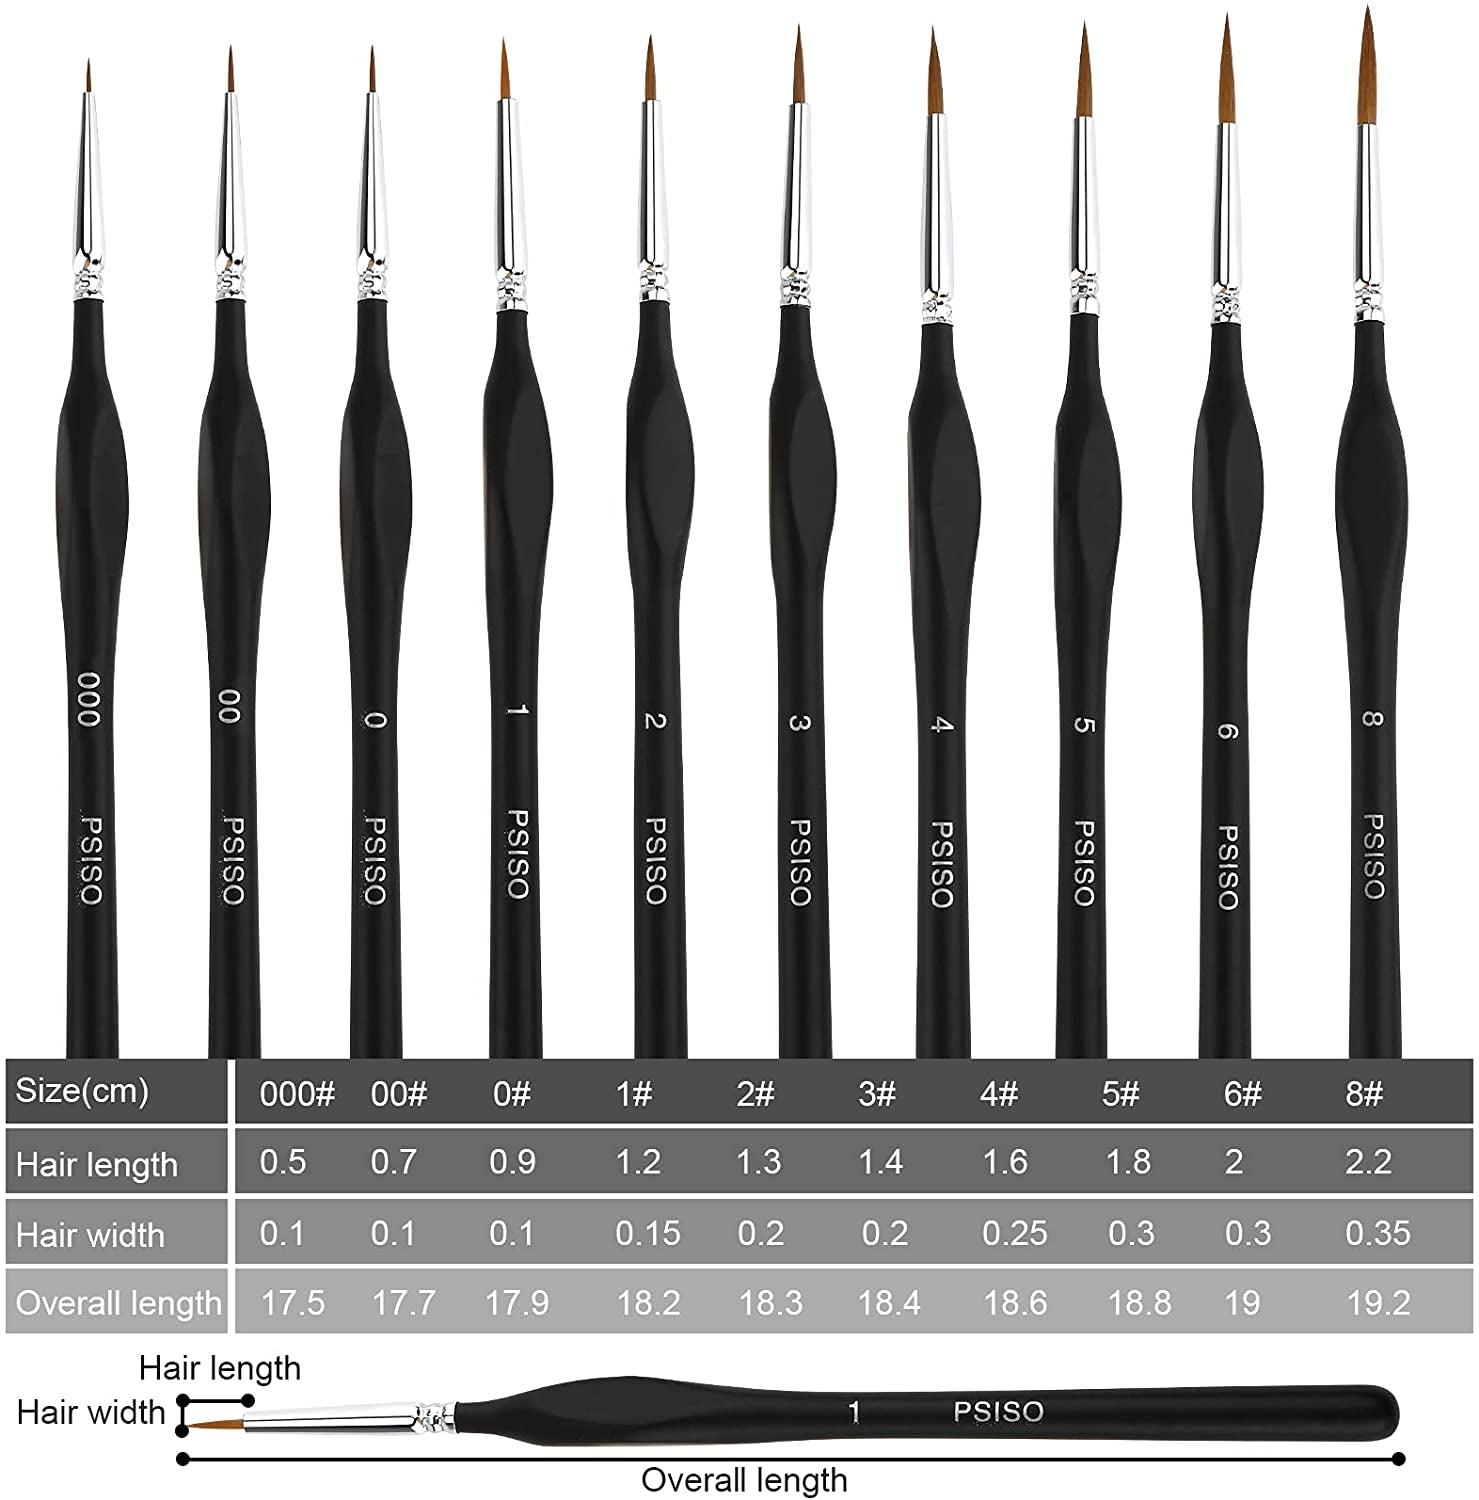 Micro Mini Fine Detail Paint Brush Set of 12 Pieces, Small Short Handle  Taklon Bristles for Detailing, Paint by Number Art, Models & Nails